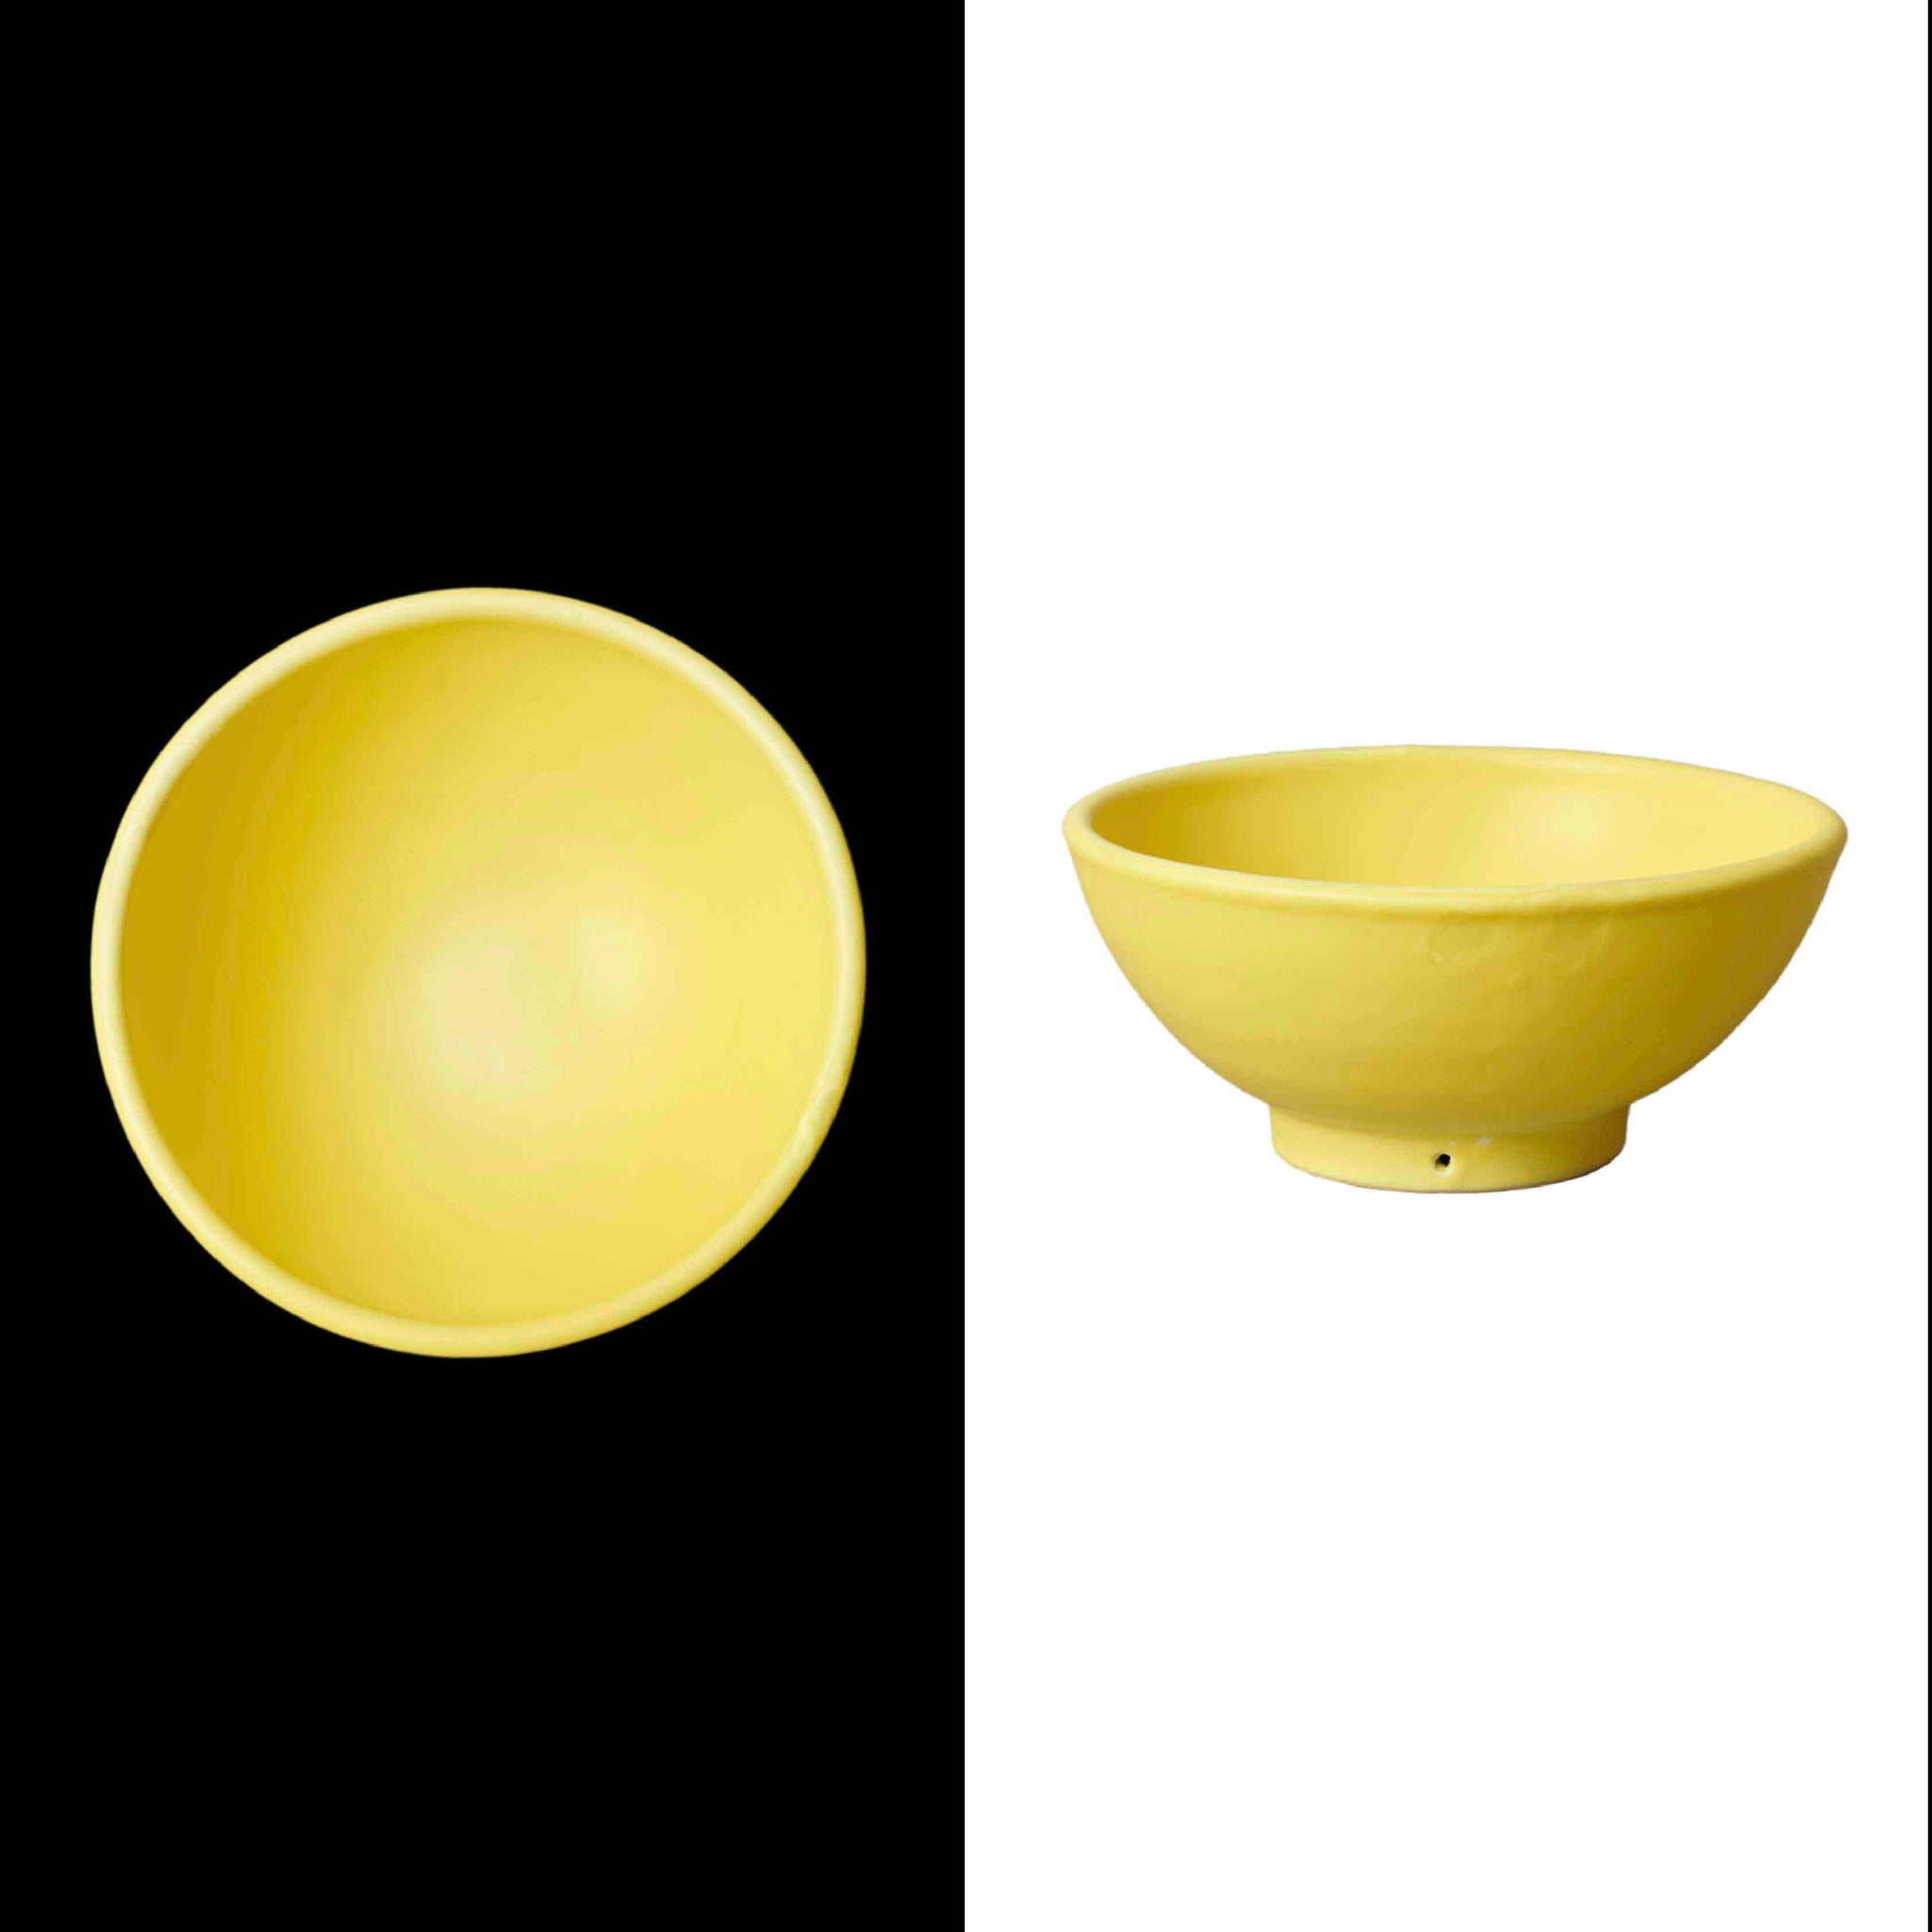 #003 THE MONOCHROME CEREAL BOWL